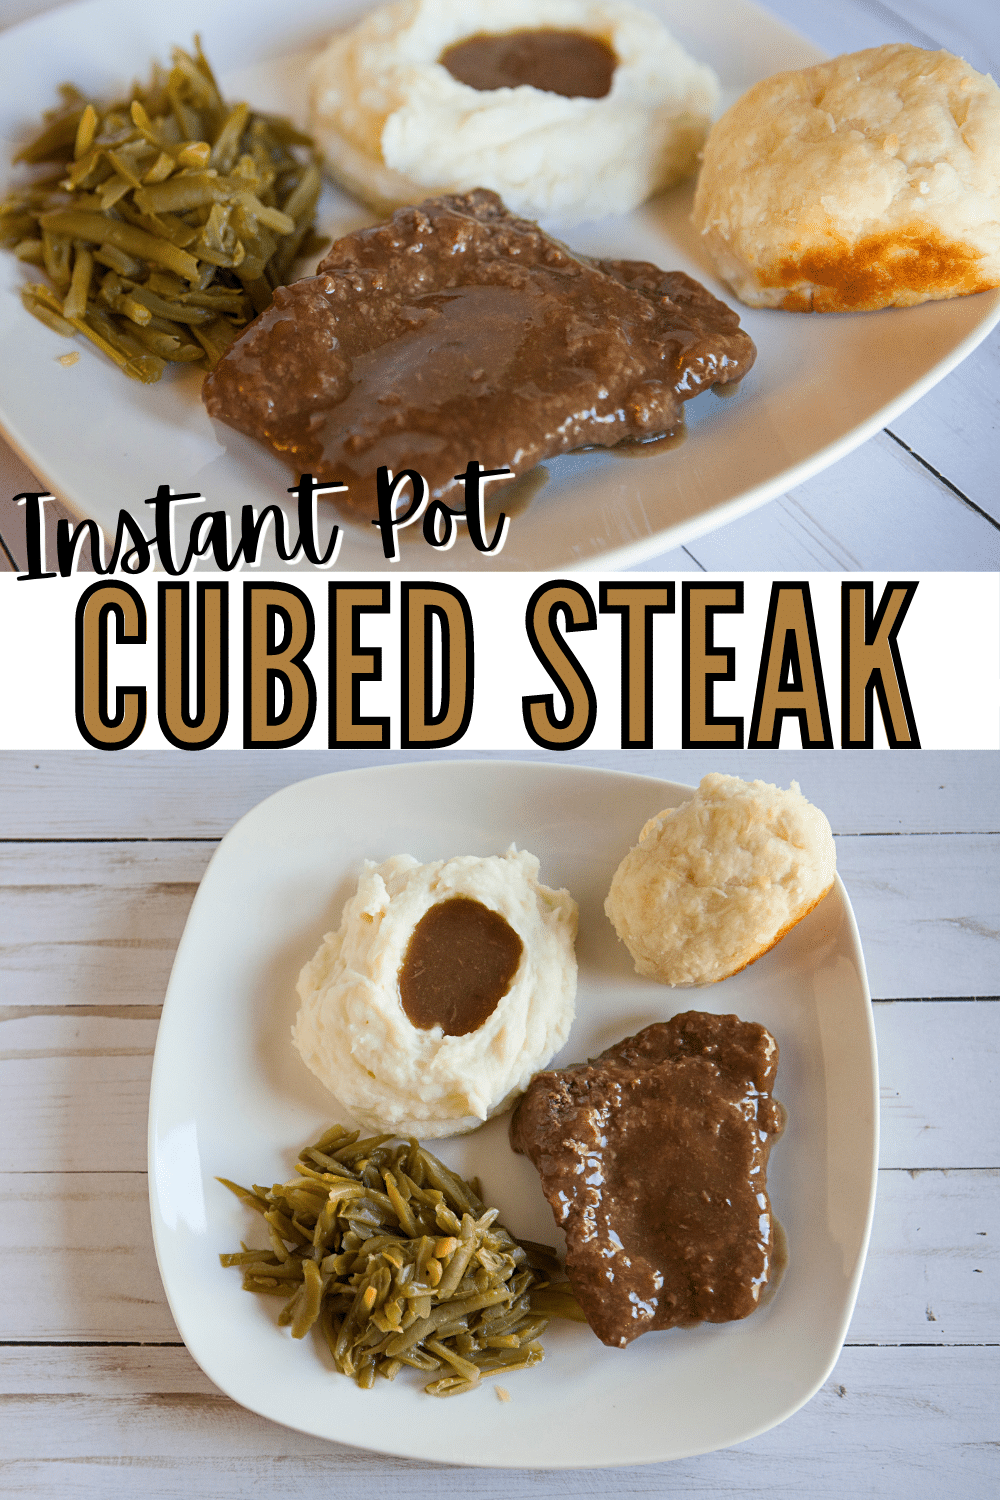 Instant Pot Cubed Steak is a great way to get a delicious and hearty meal on the table in no time! This recipe is perfect for busy weeknights. #instantpot #pressurecooker #cubedsteak #instantpotcubedsteak via @wondermomwannab